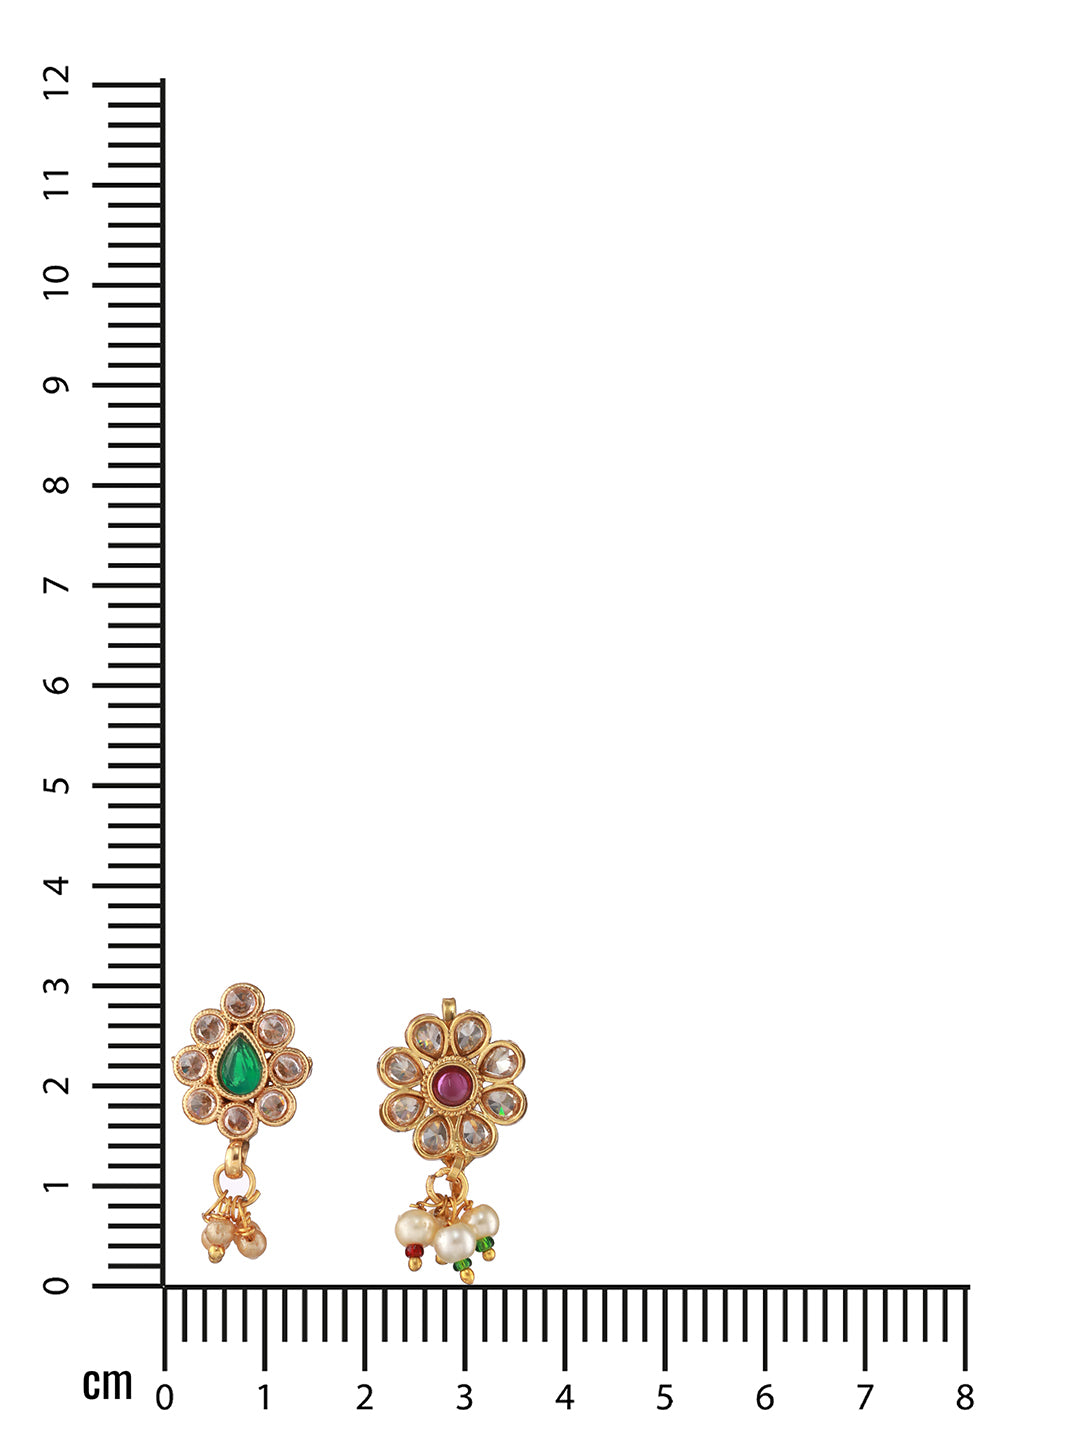 Set Of 2 Gold-Plated Red & Green Kundan Studded Flower Nose Pin - Jazzandsizzle